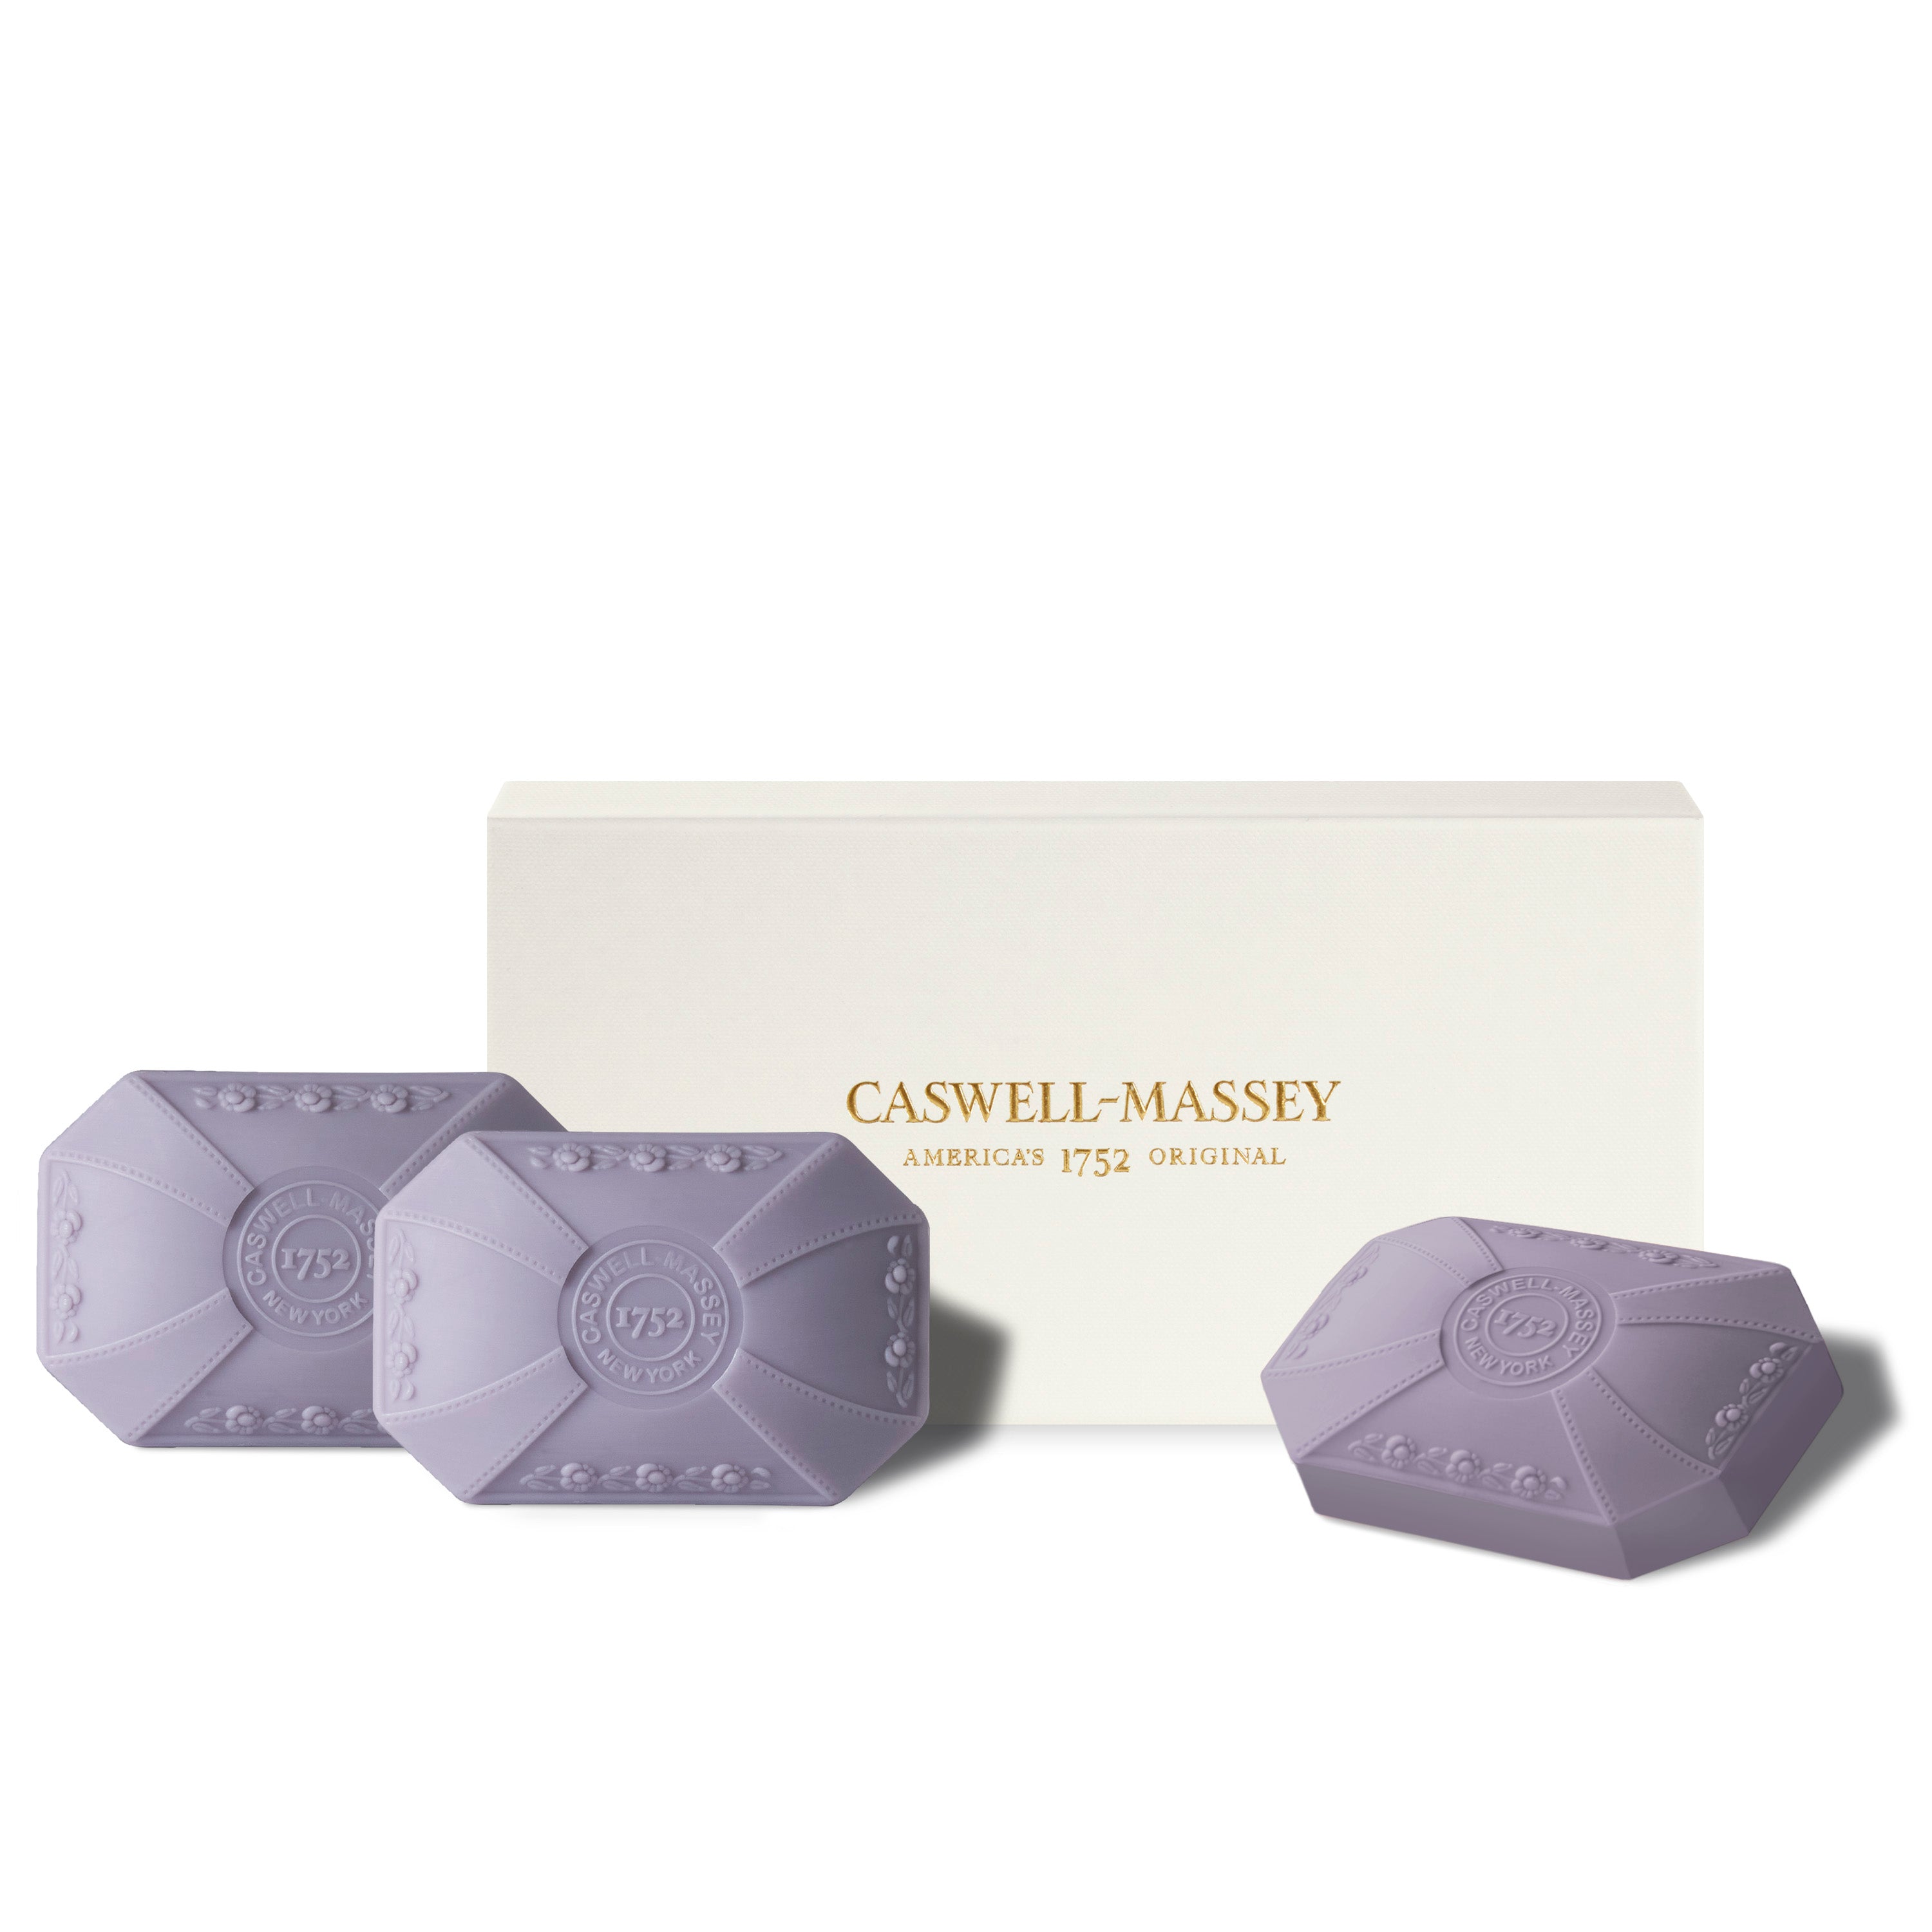 Caswell-Massey Orchid 3-Soap Gift Set shown with gift box alongside soft purple decorative soaps